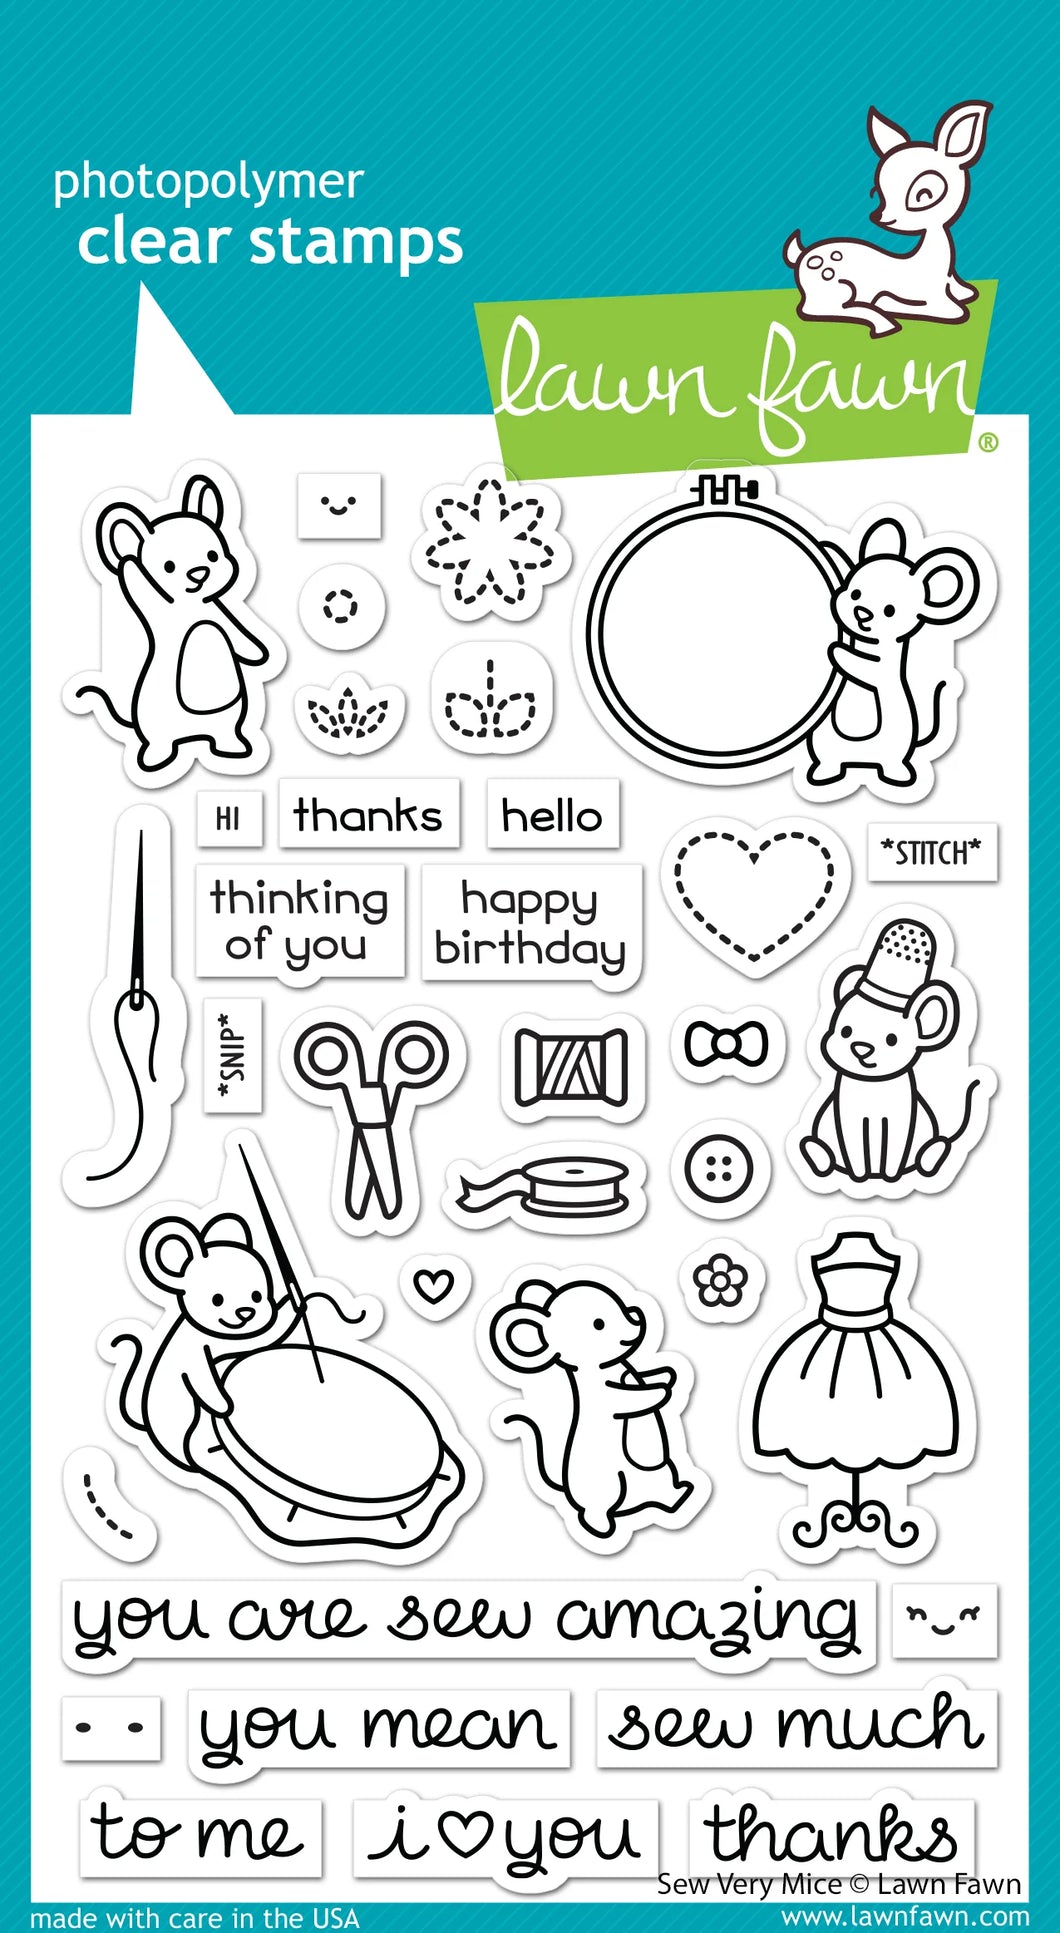 Lawn Fawn - sew very mice - clear stamp set